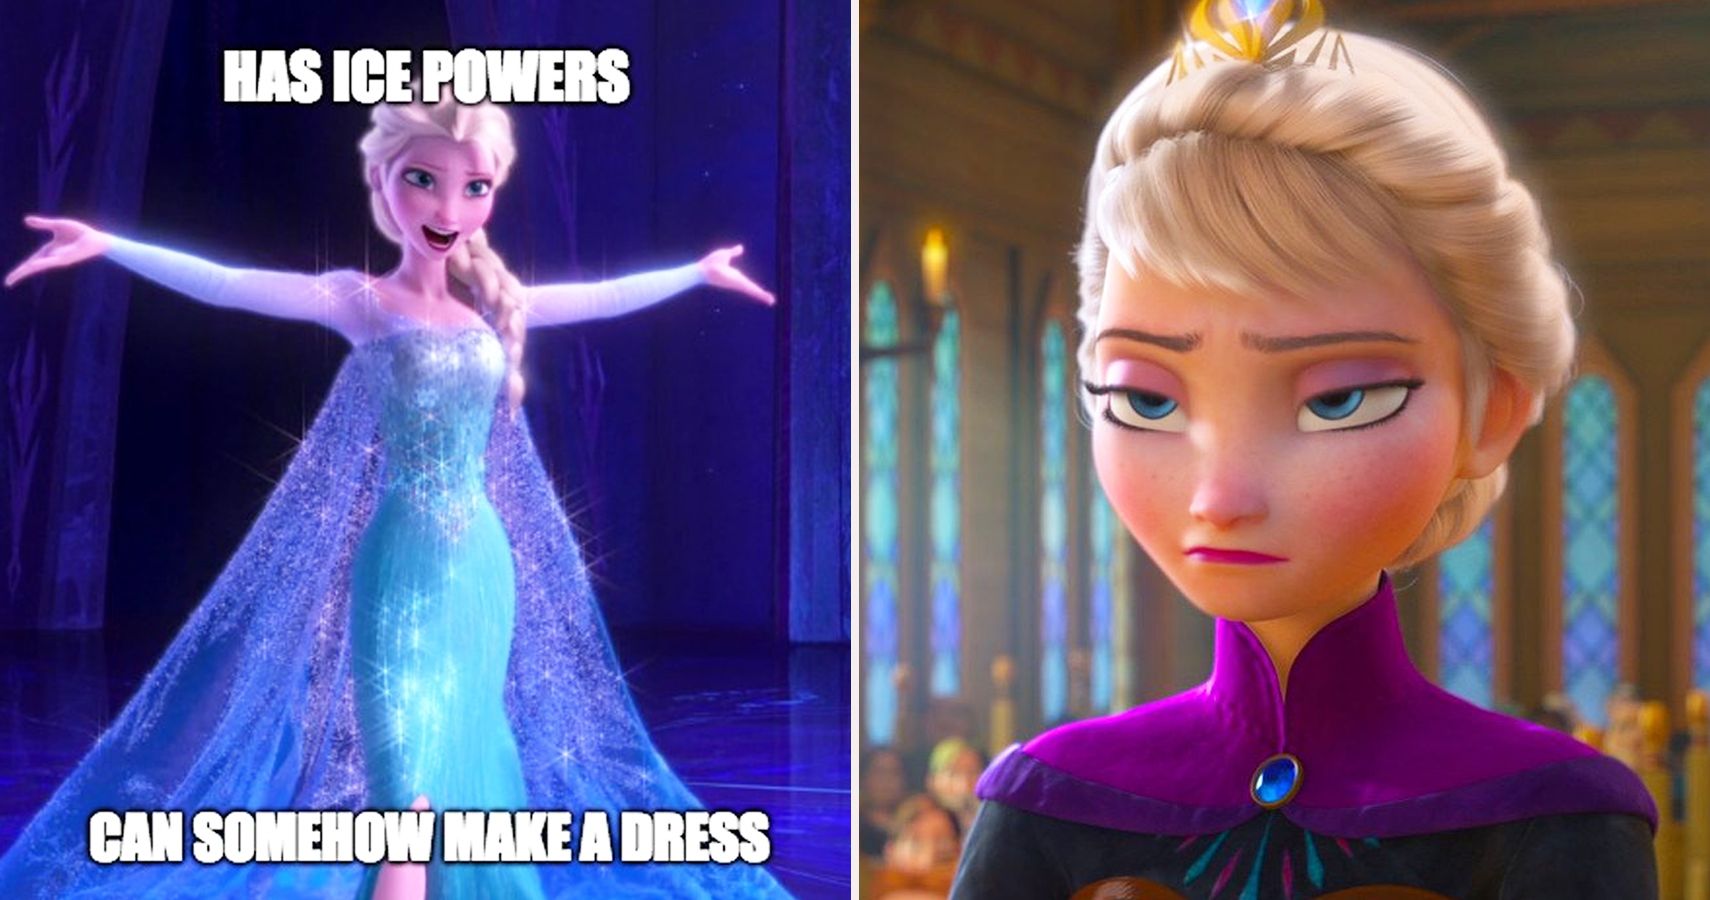 It's about owning your power!' How Frozen changed a generation of